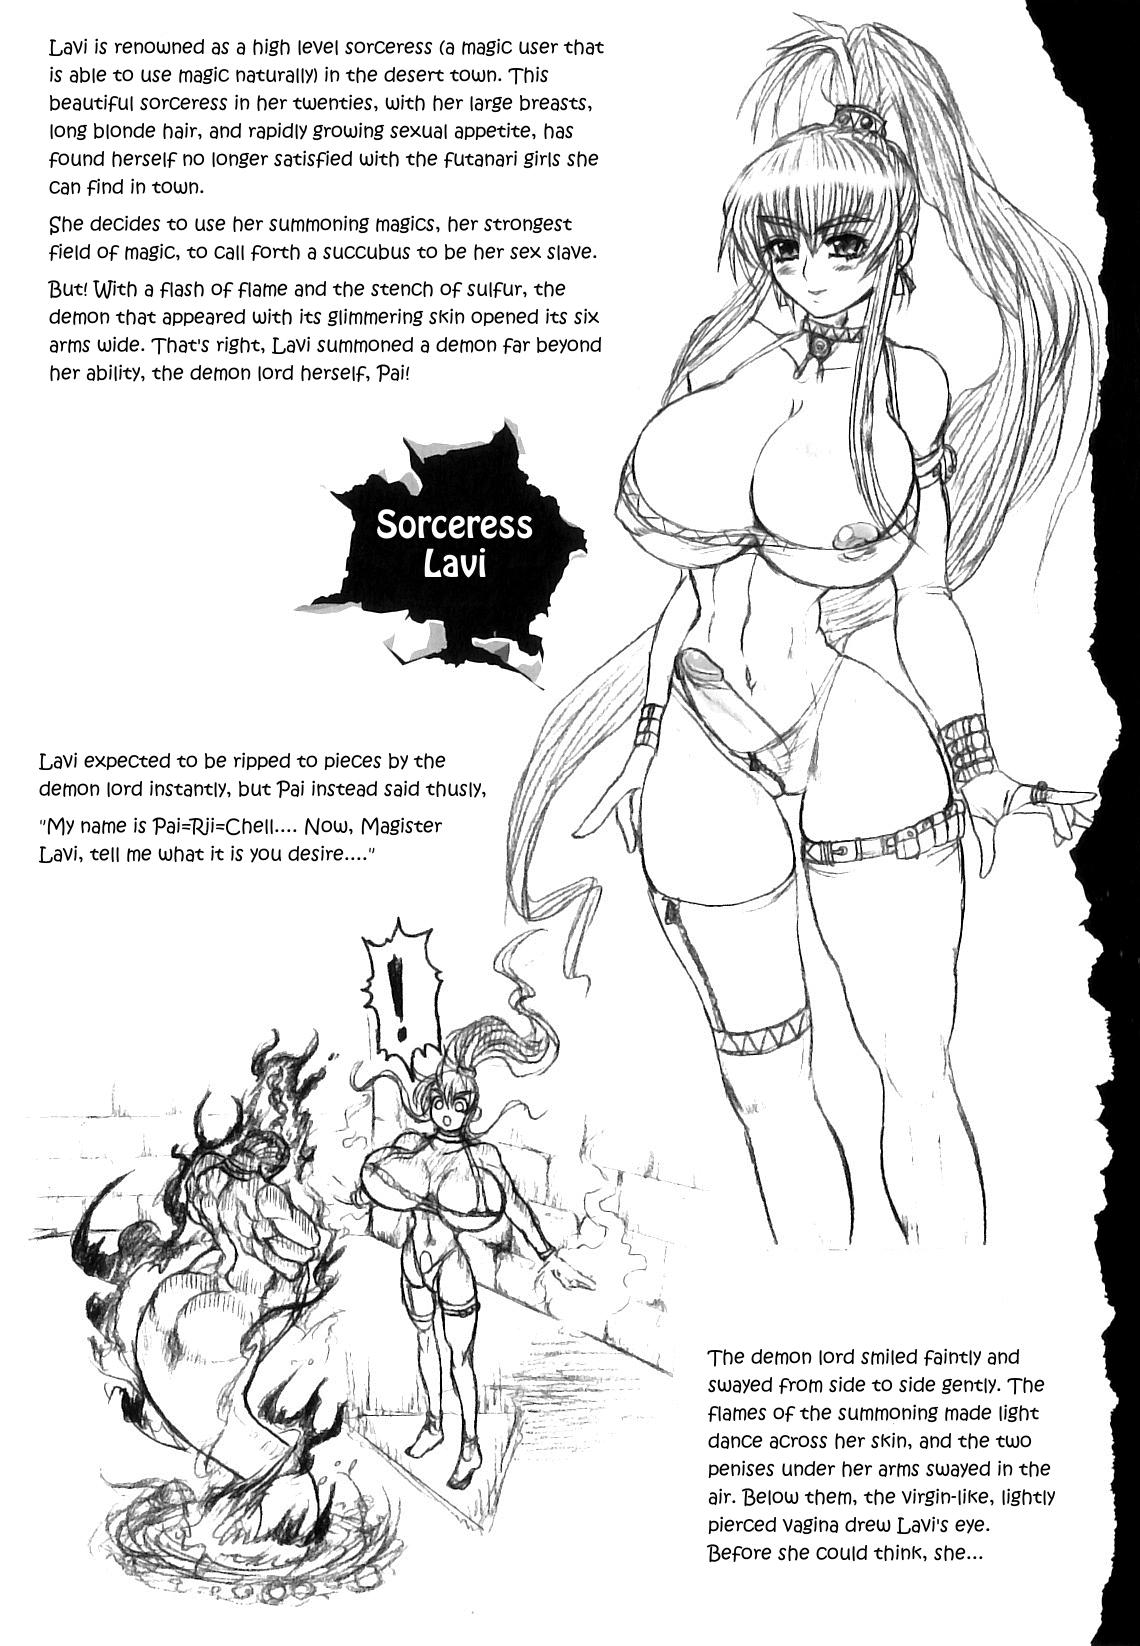 Face Fucking Sex With a Snake Demon + Character Profiles Shot - Page 3